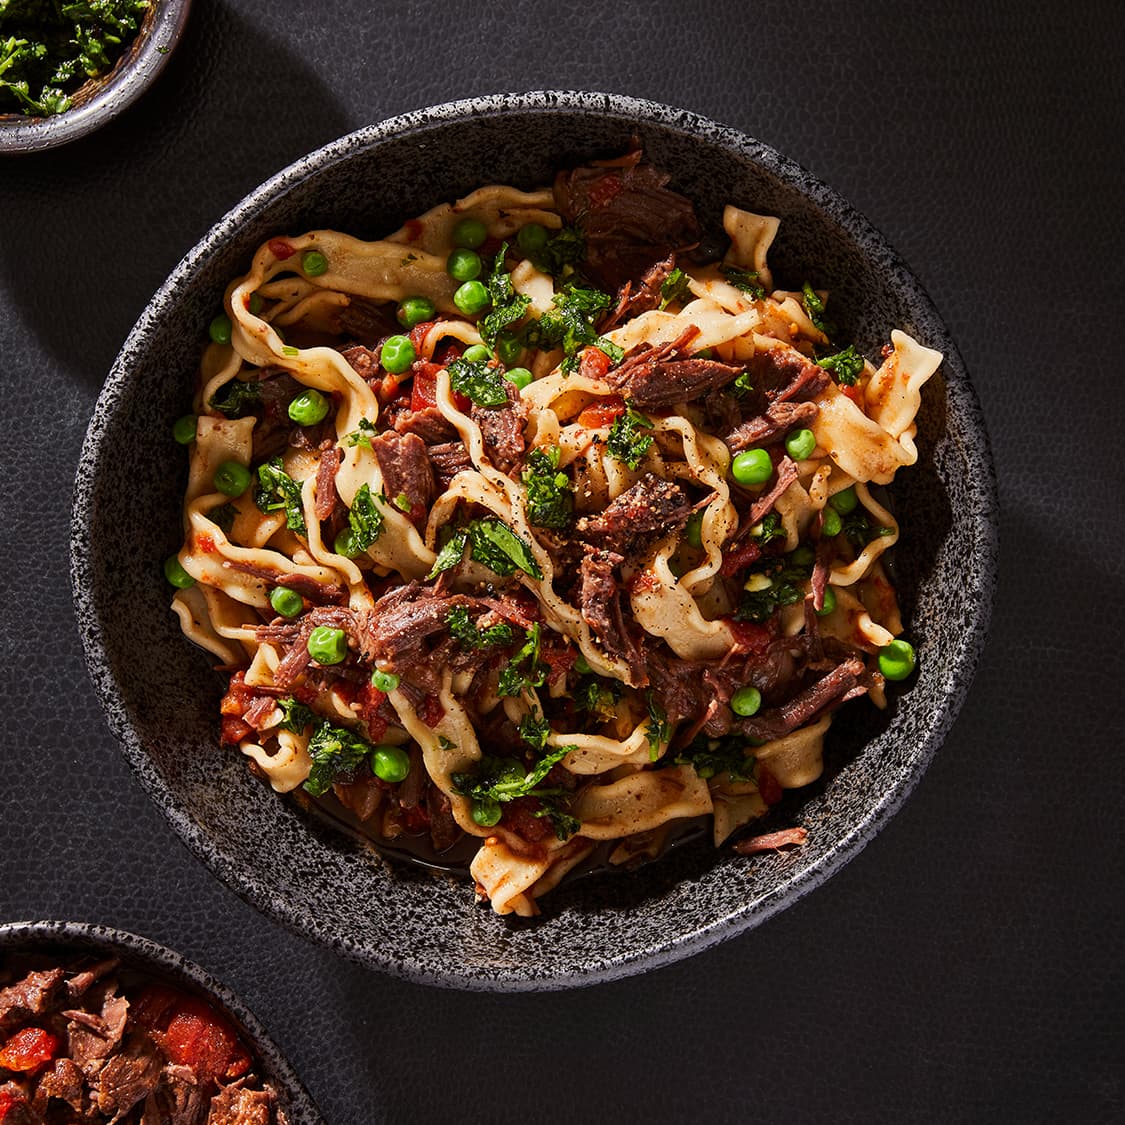 https://fleishigs.com/images/mobile-app/recipes/1043-list-beef-cheek-pappardelle-with-parsley-gremolata.jpg